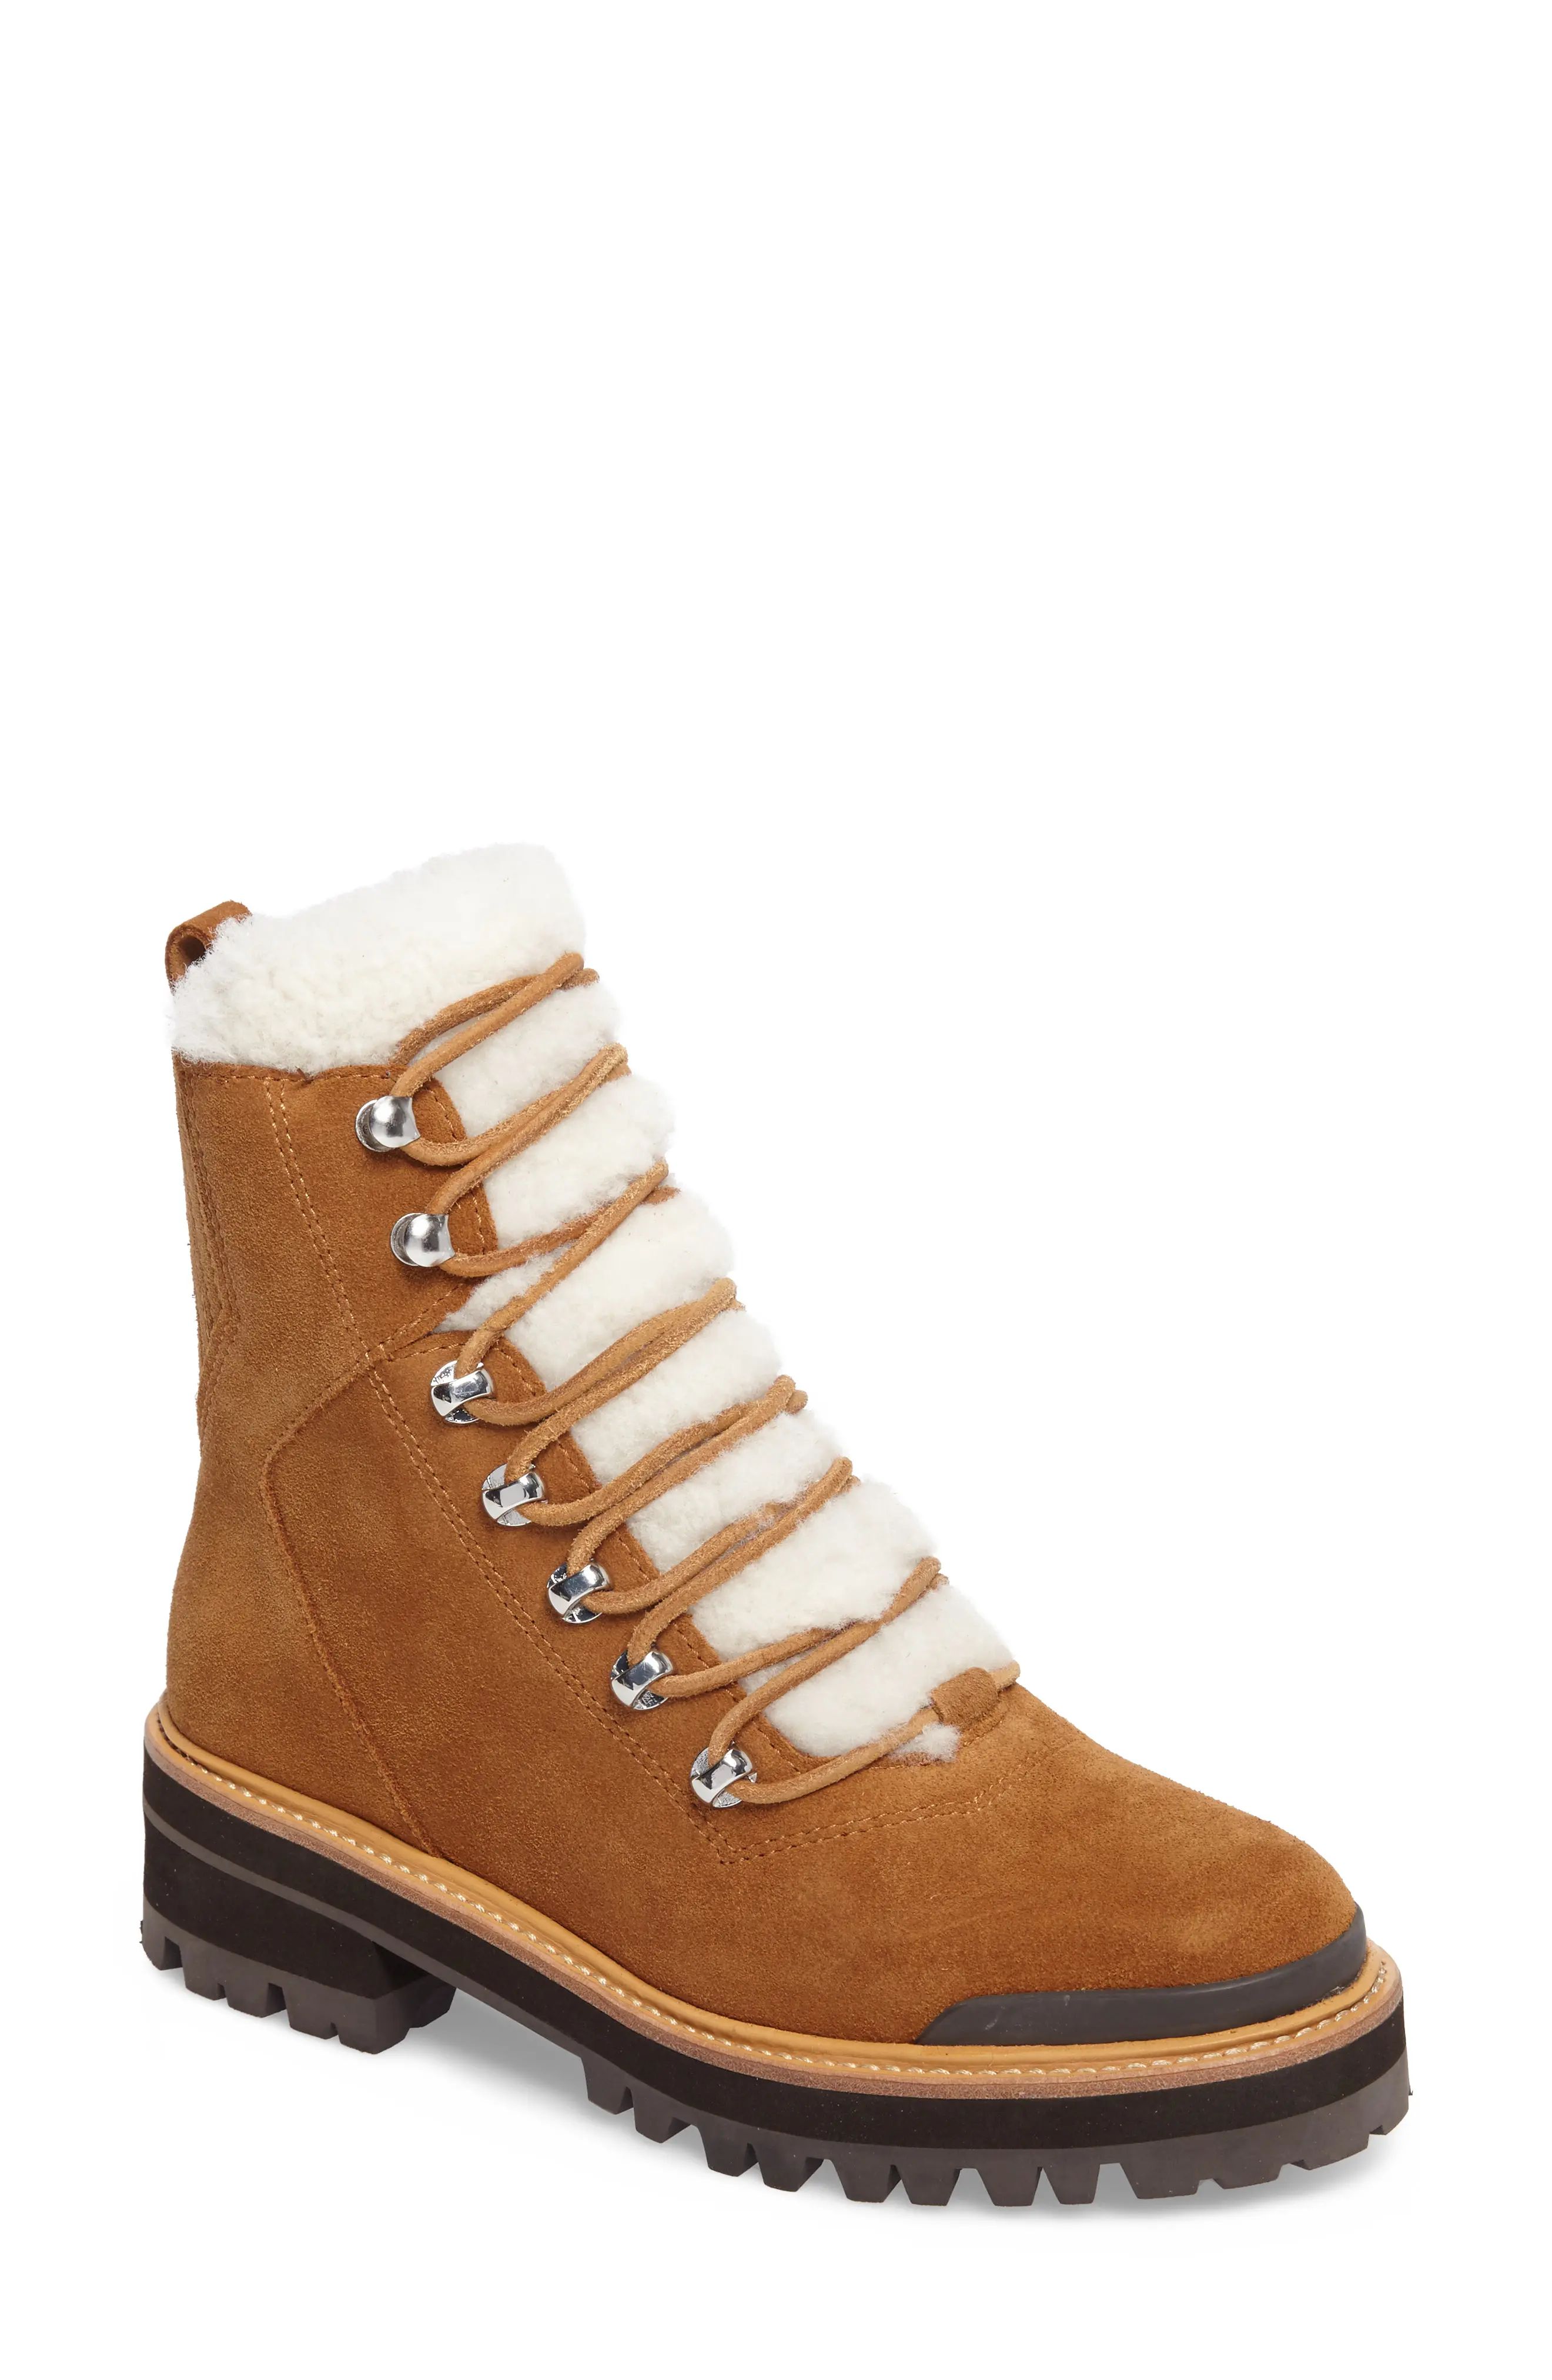 Women's Marc Fisher Ltd Izzie Genuine Shearling Lace-Up Boot, Size 9 M - Brown | Nordstrom